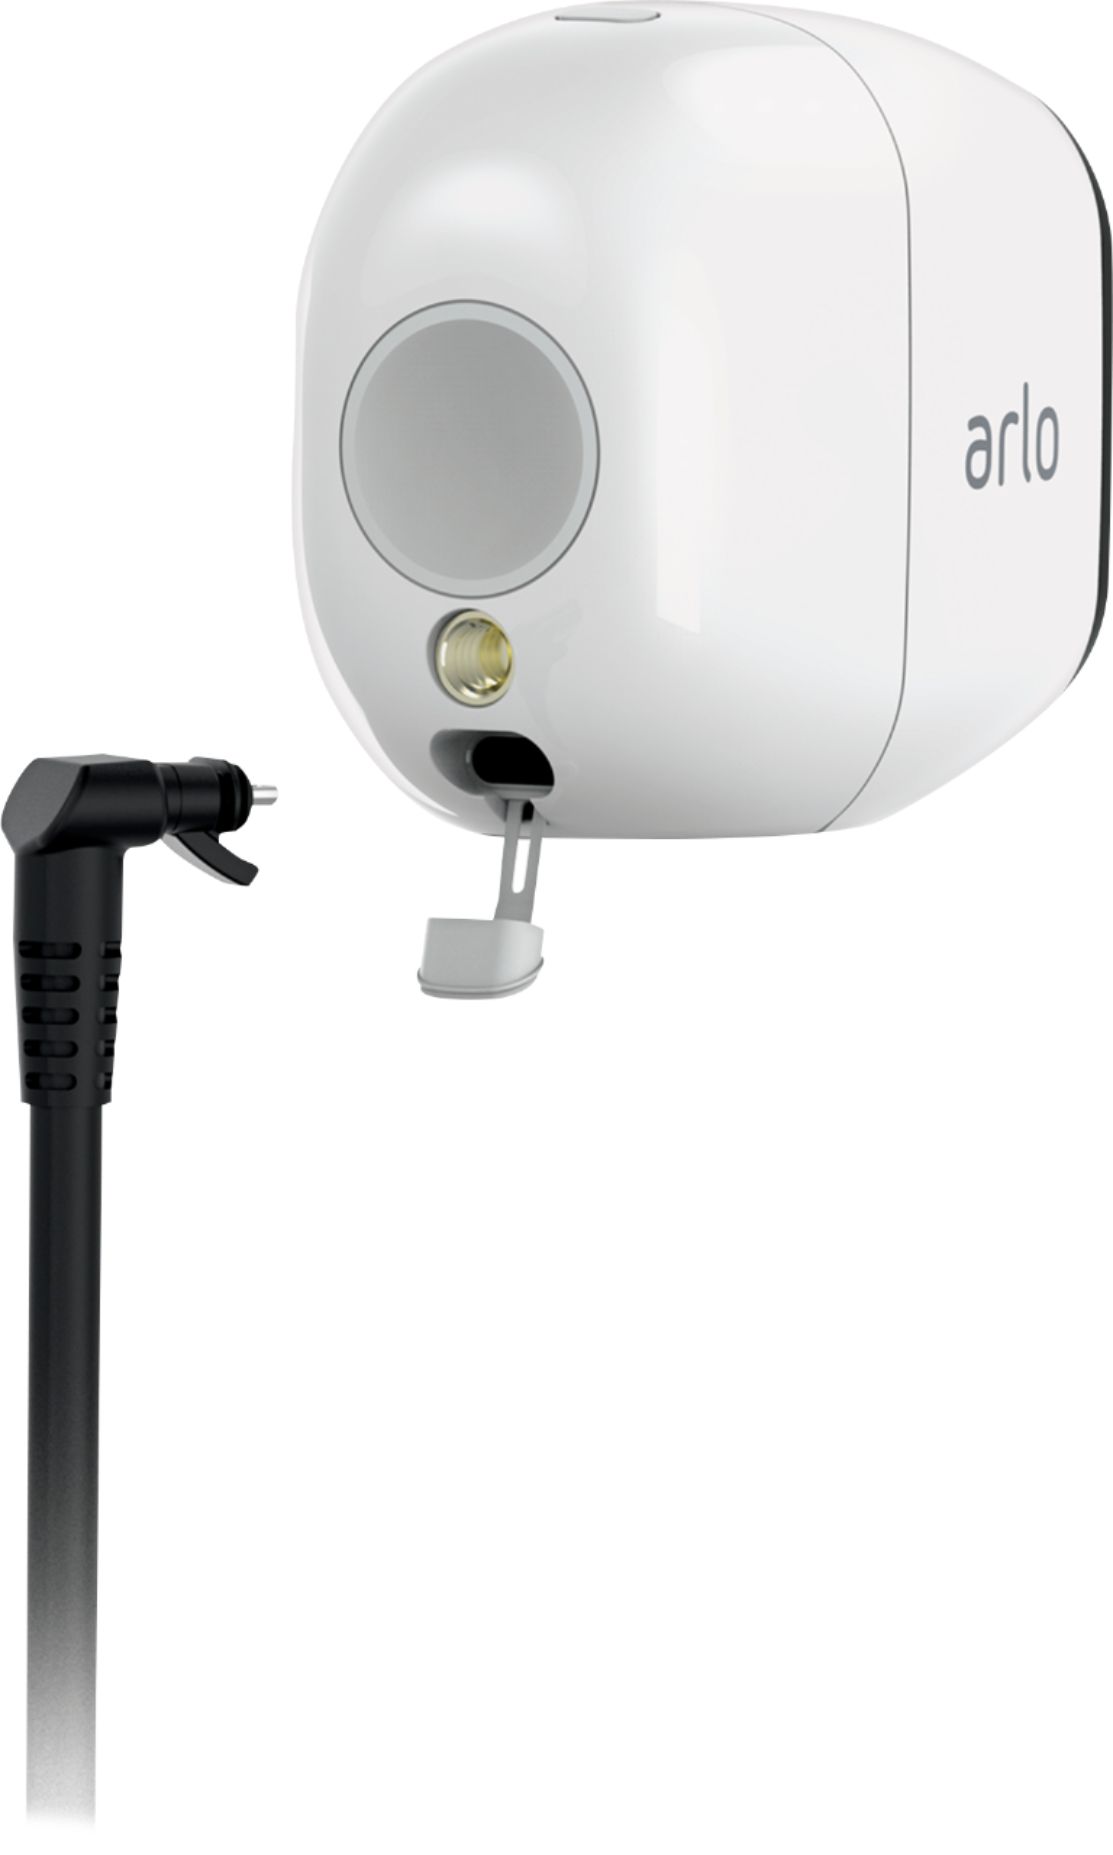 arlo pro wired